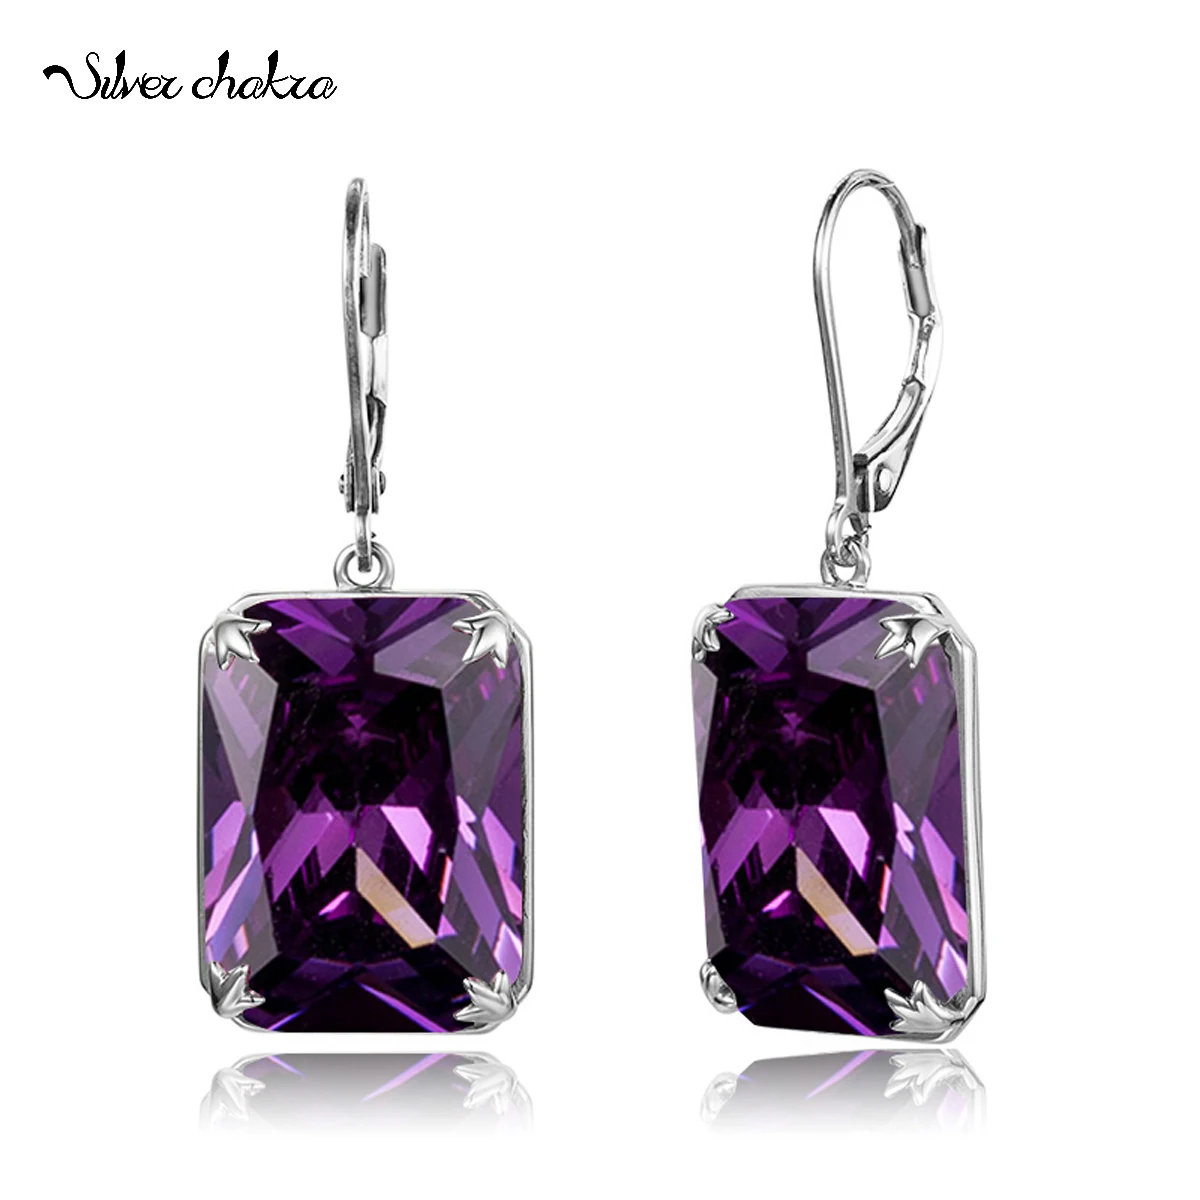 Women Silver Earrings Classic Gothic Amethyst Gemstones Vintage Drop Long Earrings 925 Sterling Silver Jewelry Engagement Gifts